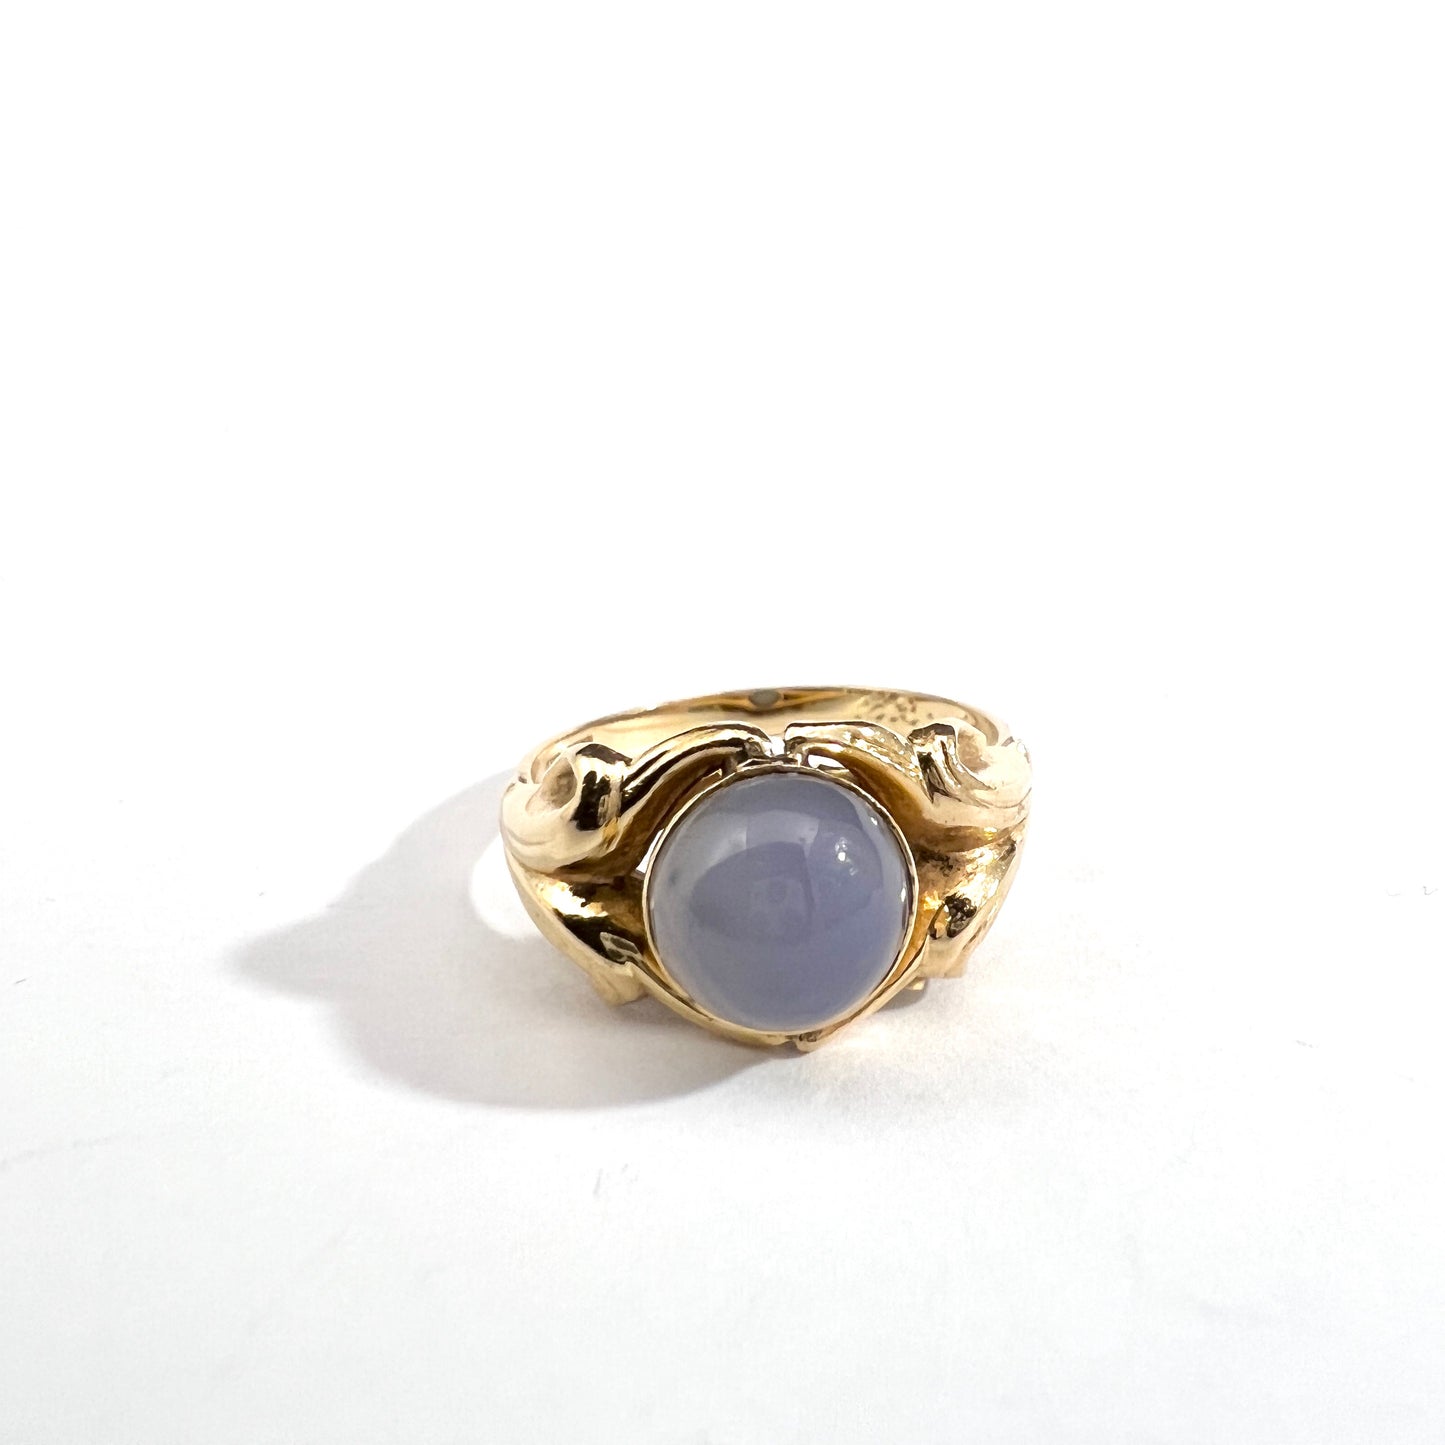 J Petersson, Stockholm 1956. Vintage Mid-century 18k Gold Chalcedony Ring.